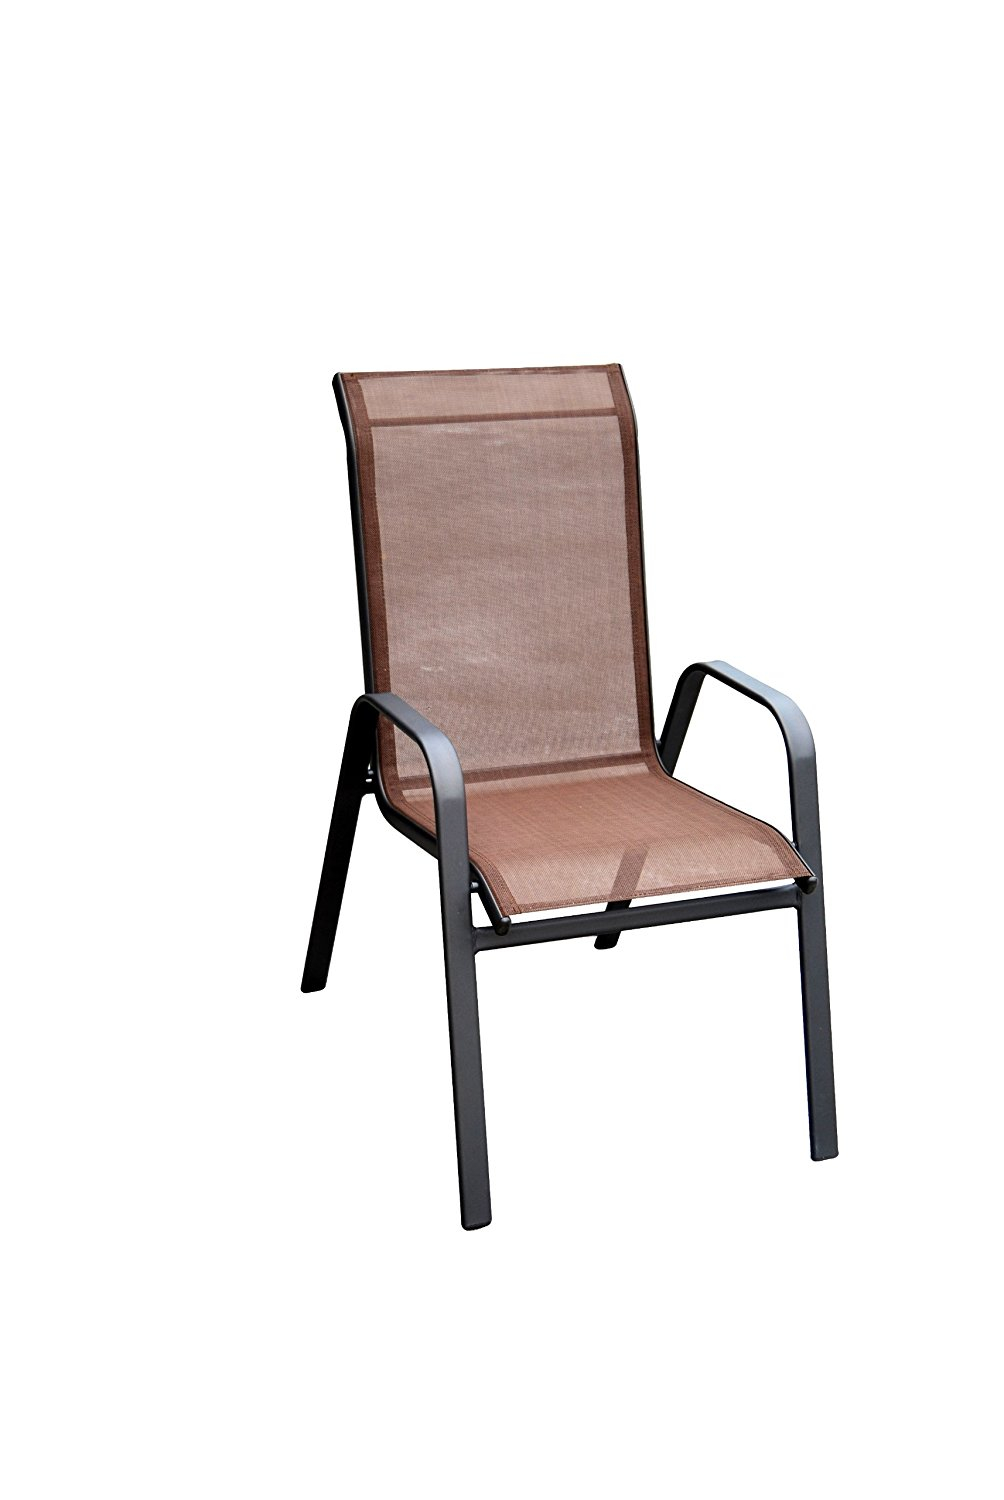 Slingback Patio Chairs Reviews And Information Outsidemodern pertaining to size 1004 X 1500